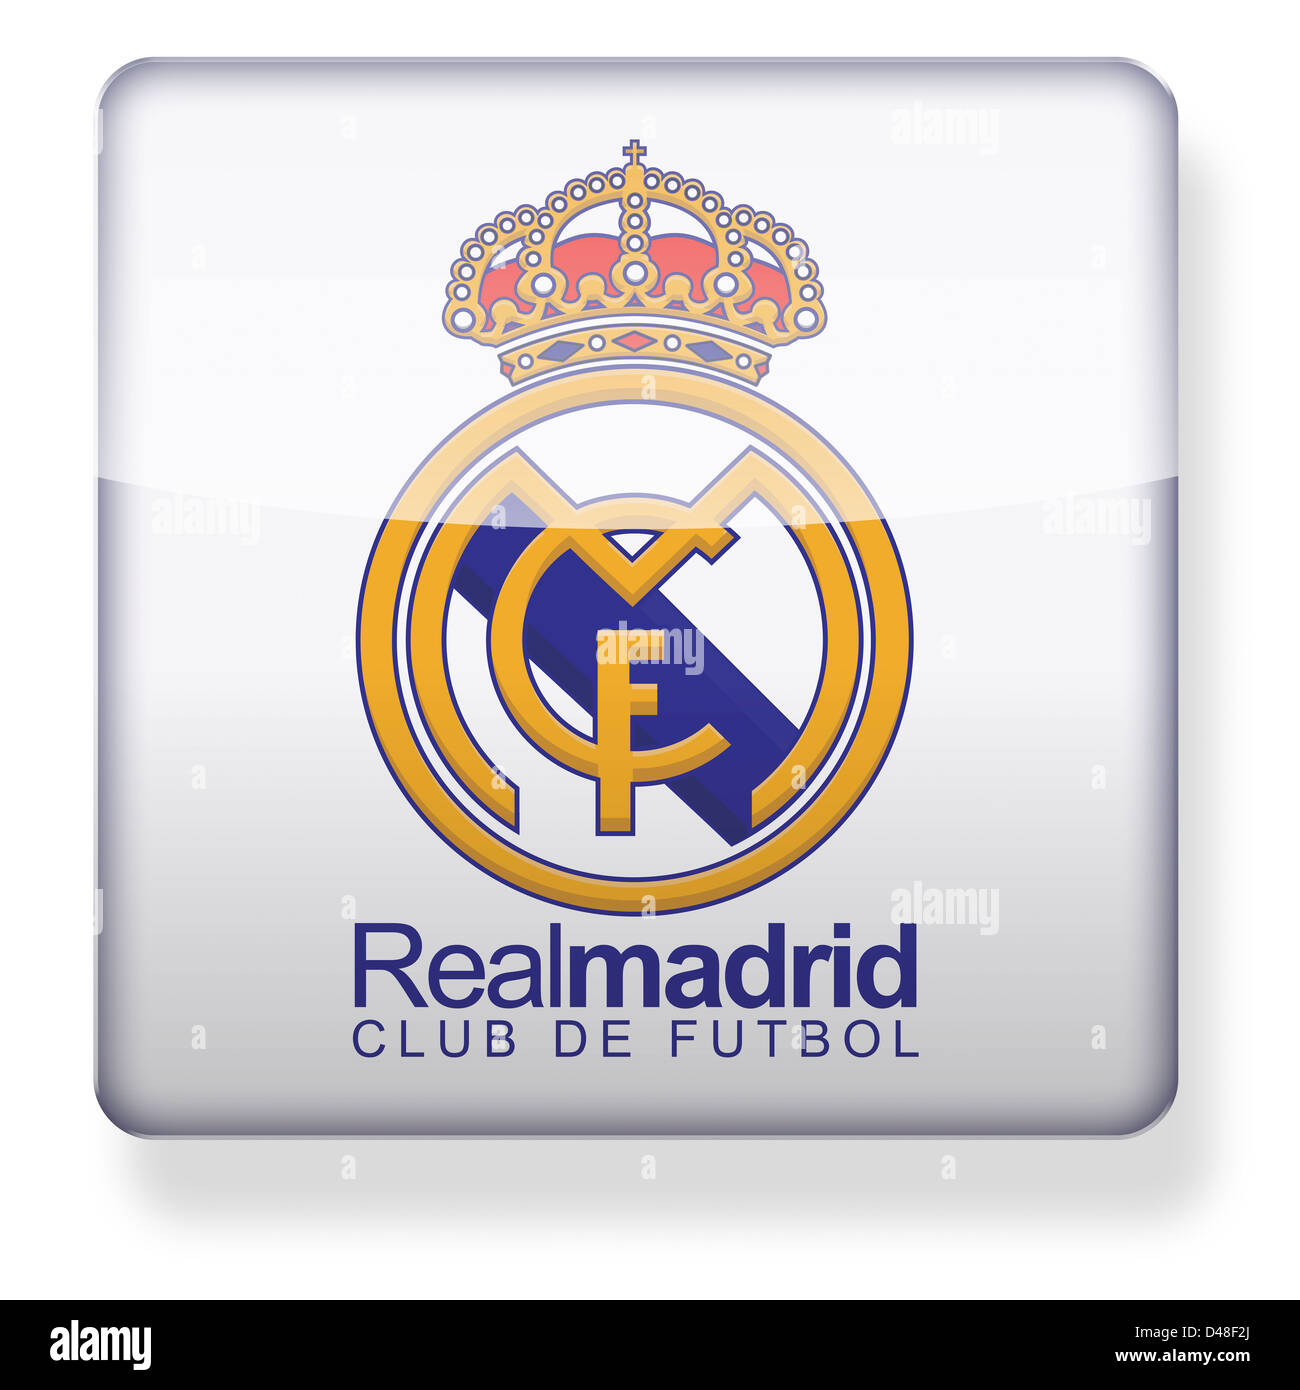 Real Madrid football club logo as an app icon. Clipping path included. Stock Photo